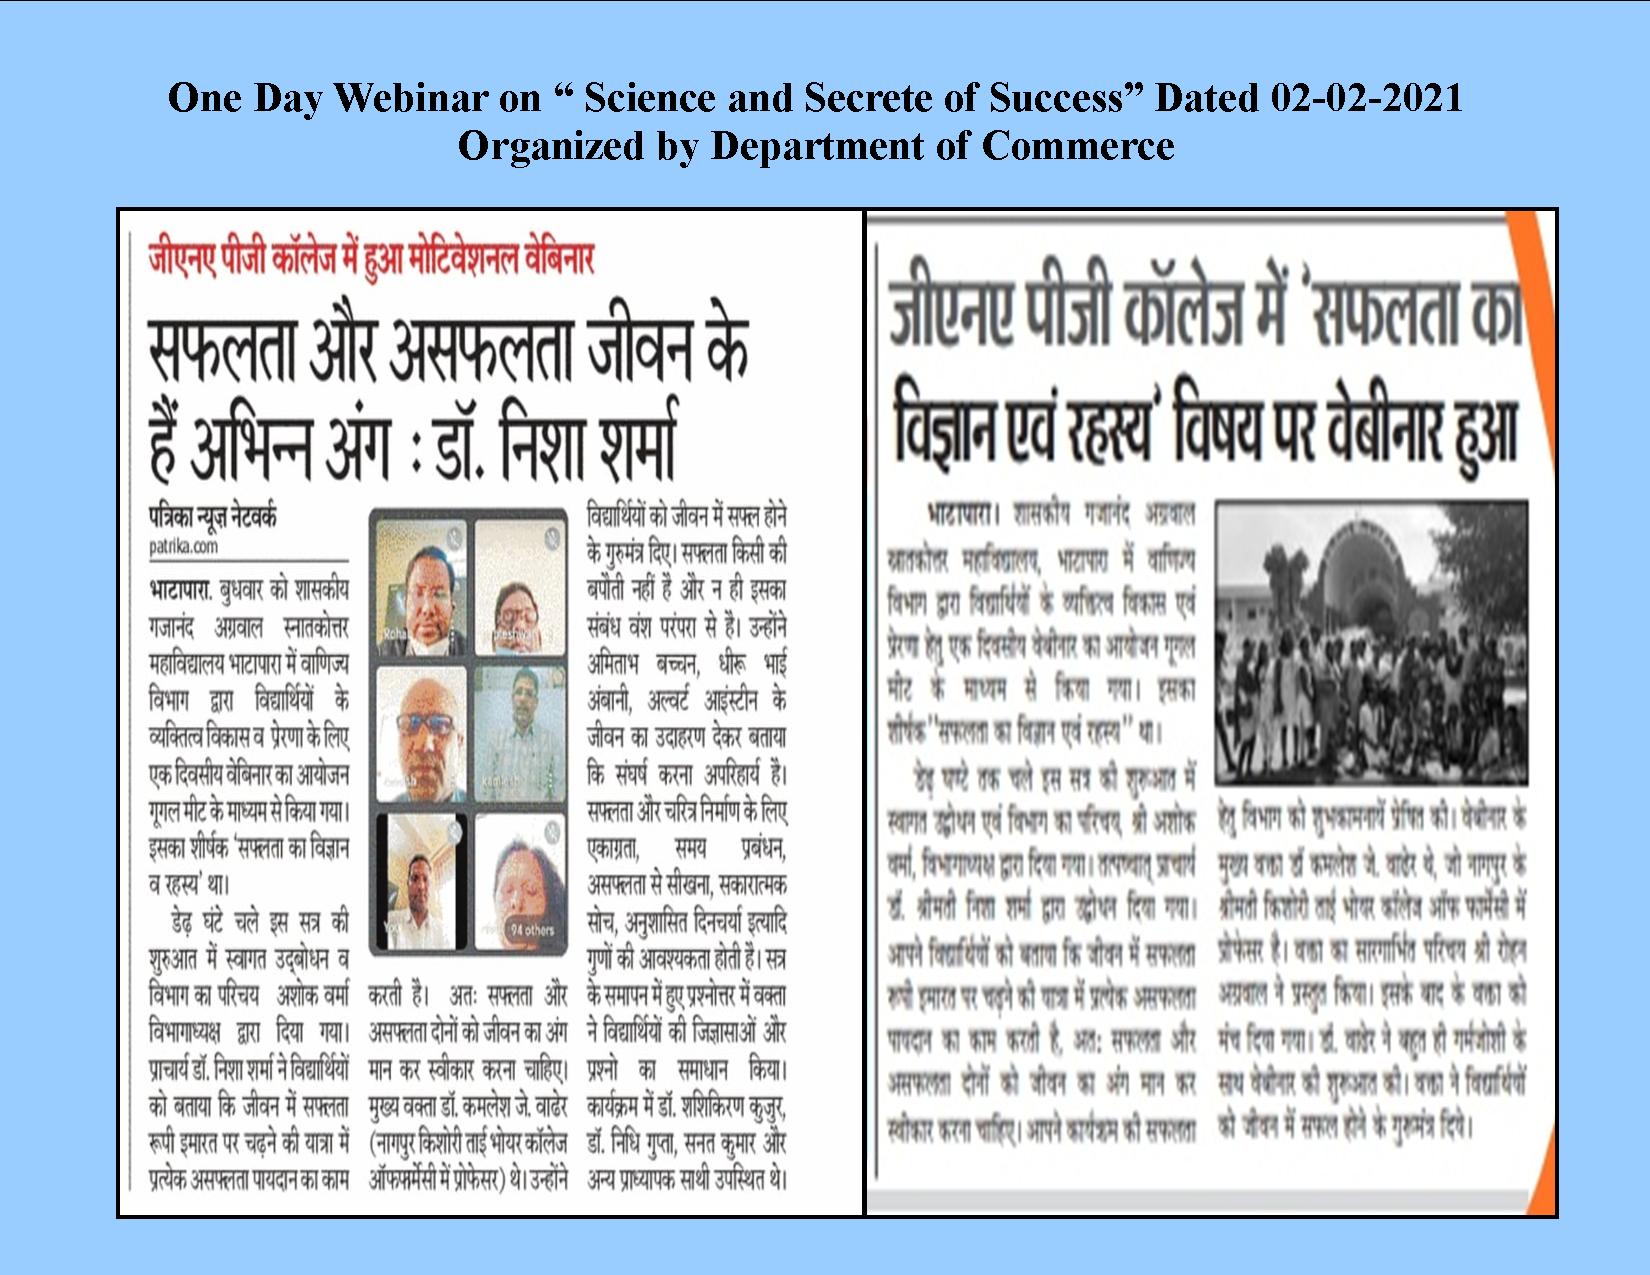 Govt. G. N. A. P.G. College, Bhatapara | Govt. College Bhatapara-One Day Webinar on “ Science and Secrete of Success” Dated 02-02-2021 Organized by Department of Commerce